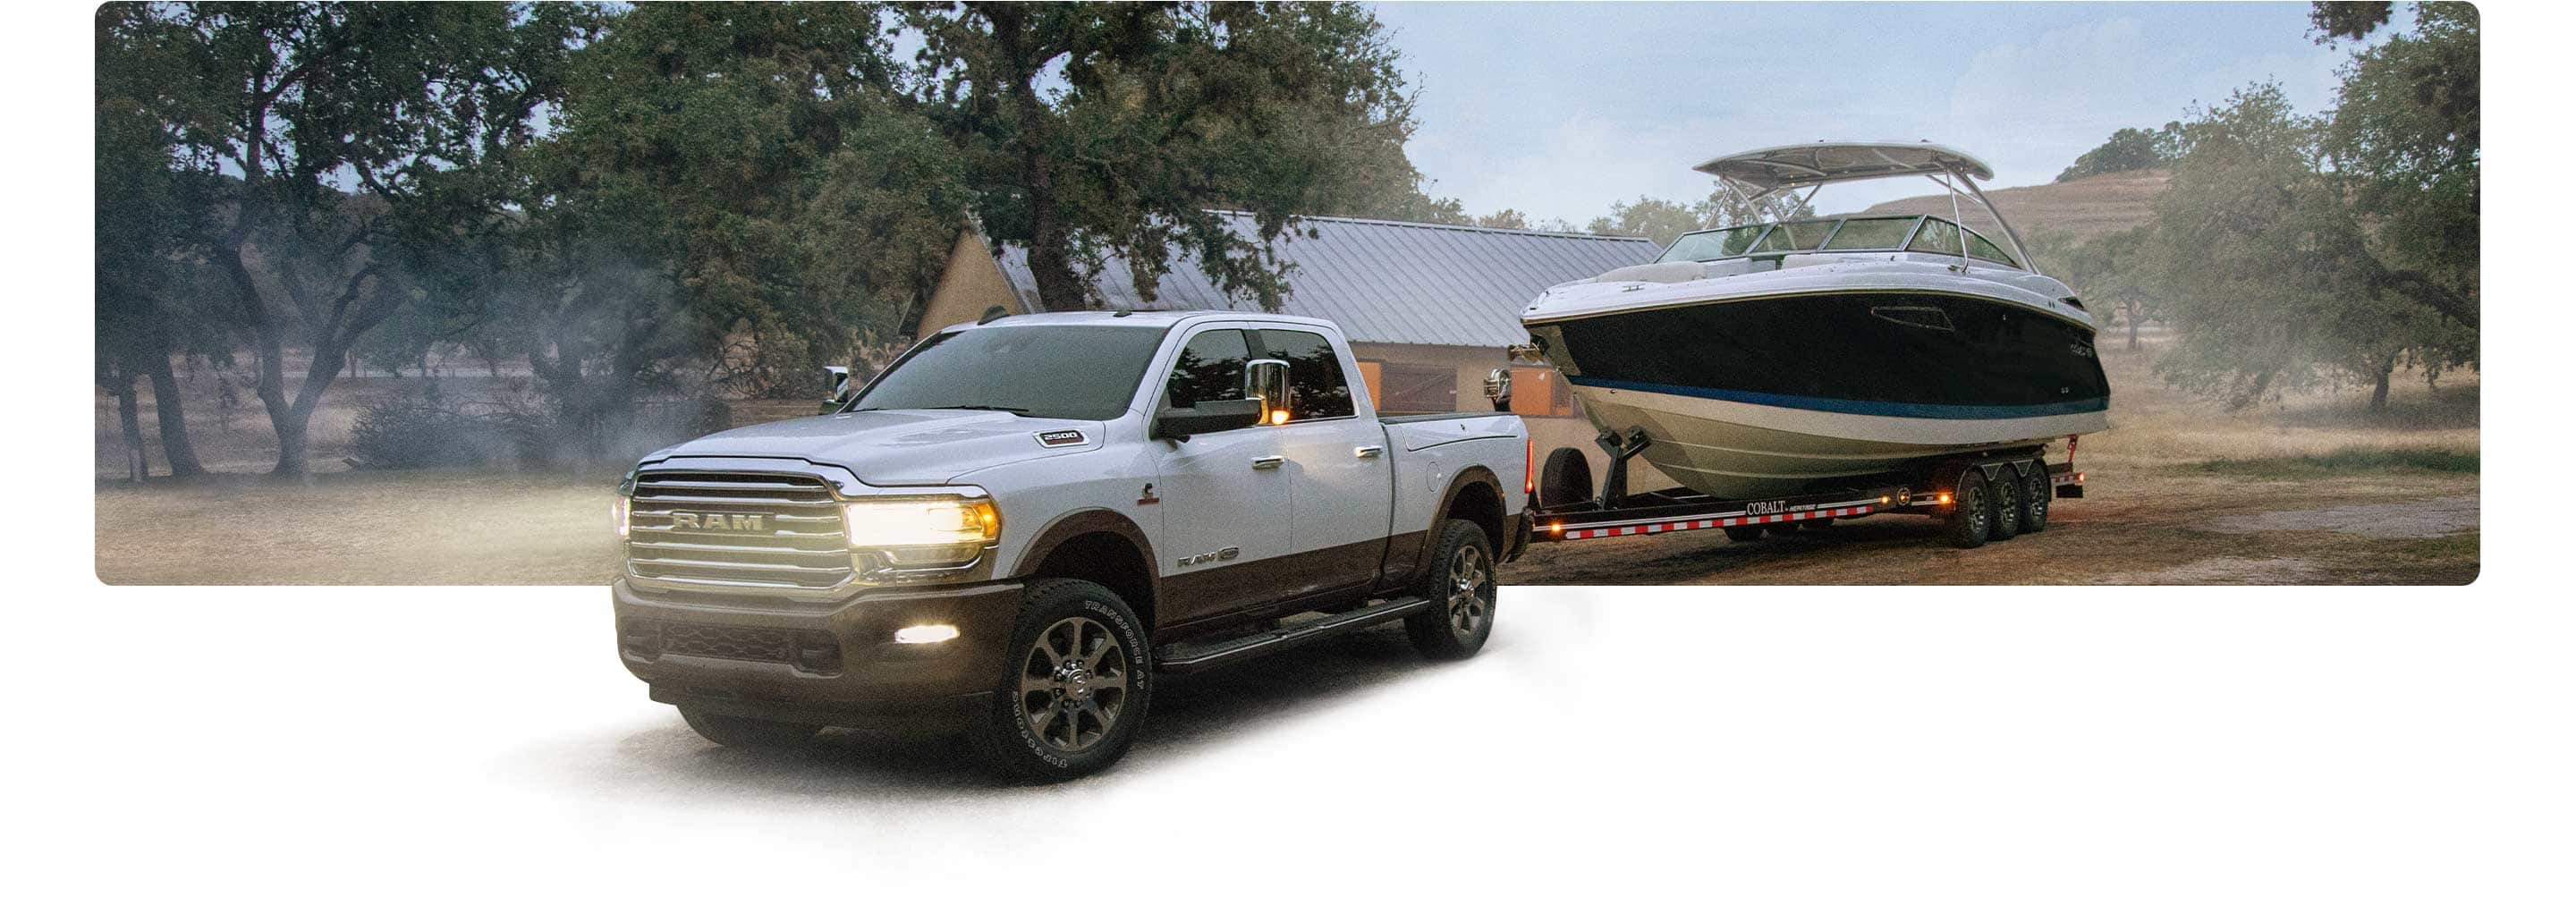 The 2021 Ram 2500 towing a boat on a dirt road.